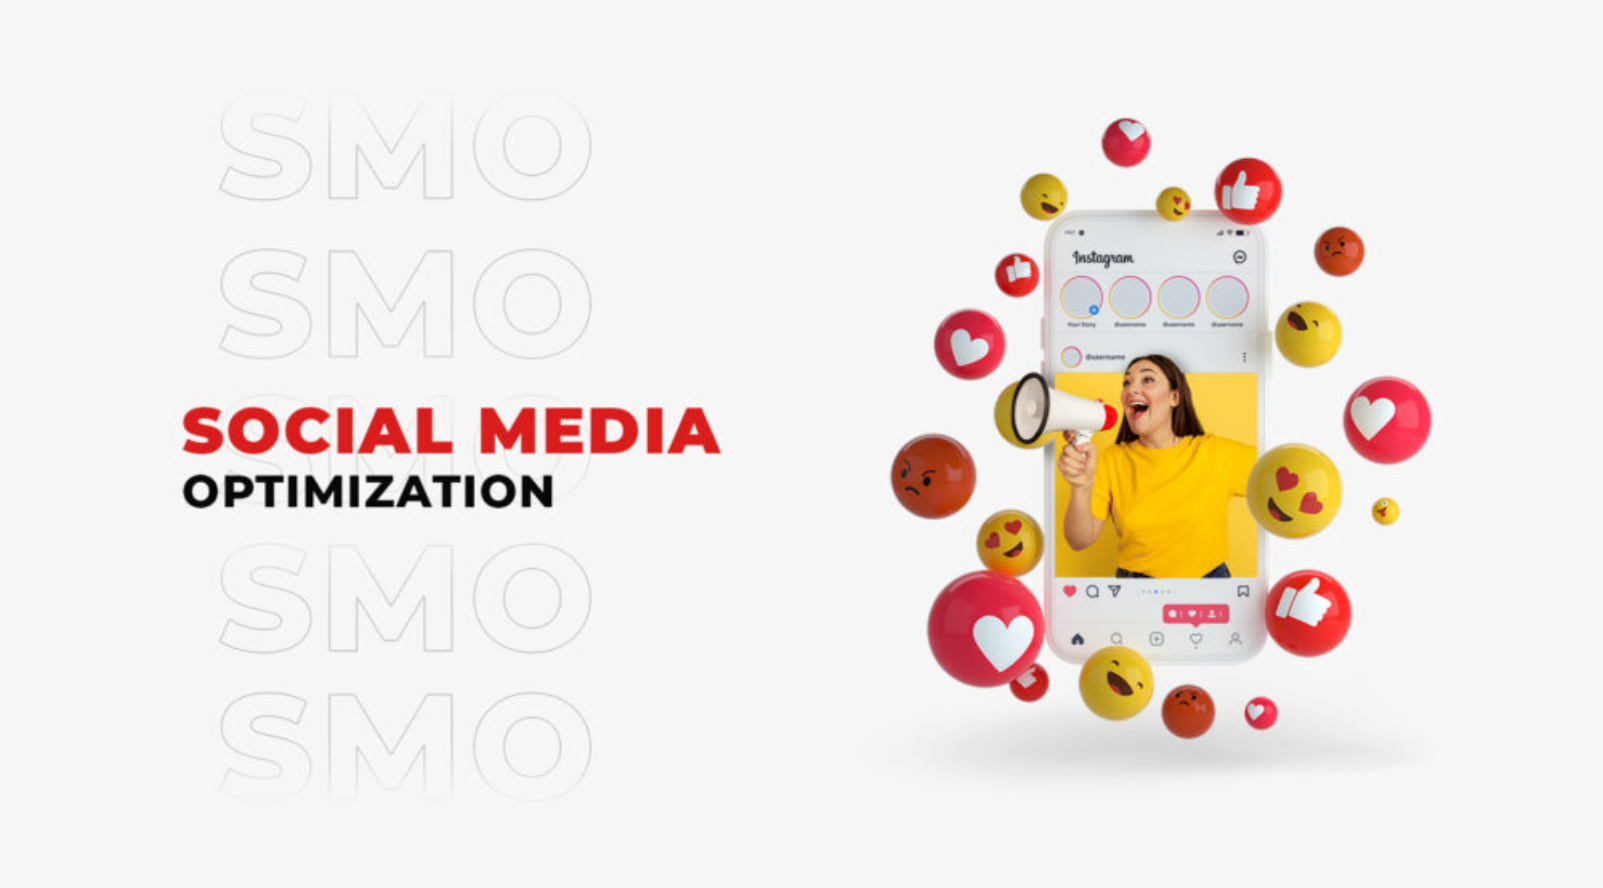 The essential role of Social Media Optimization (SMO) in modern marketing strategies